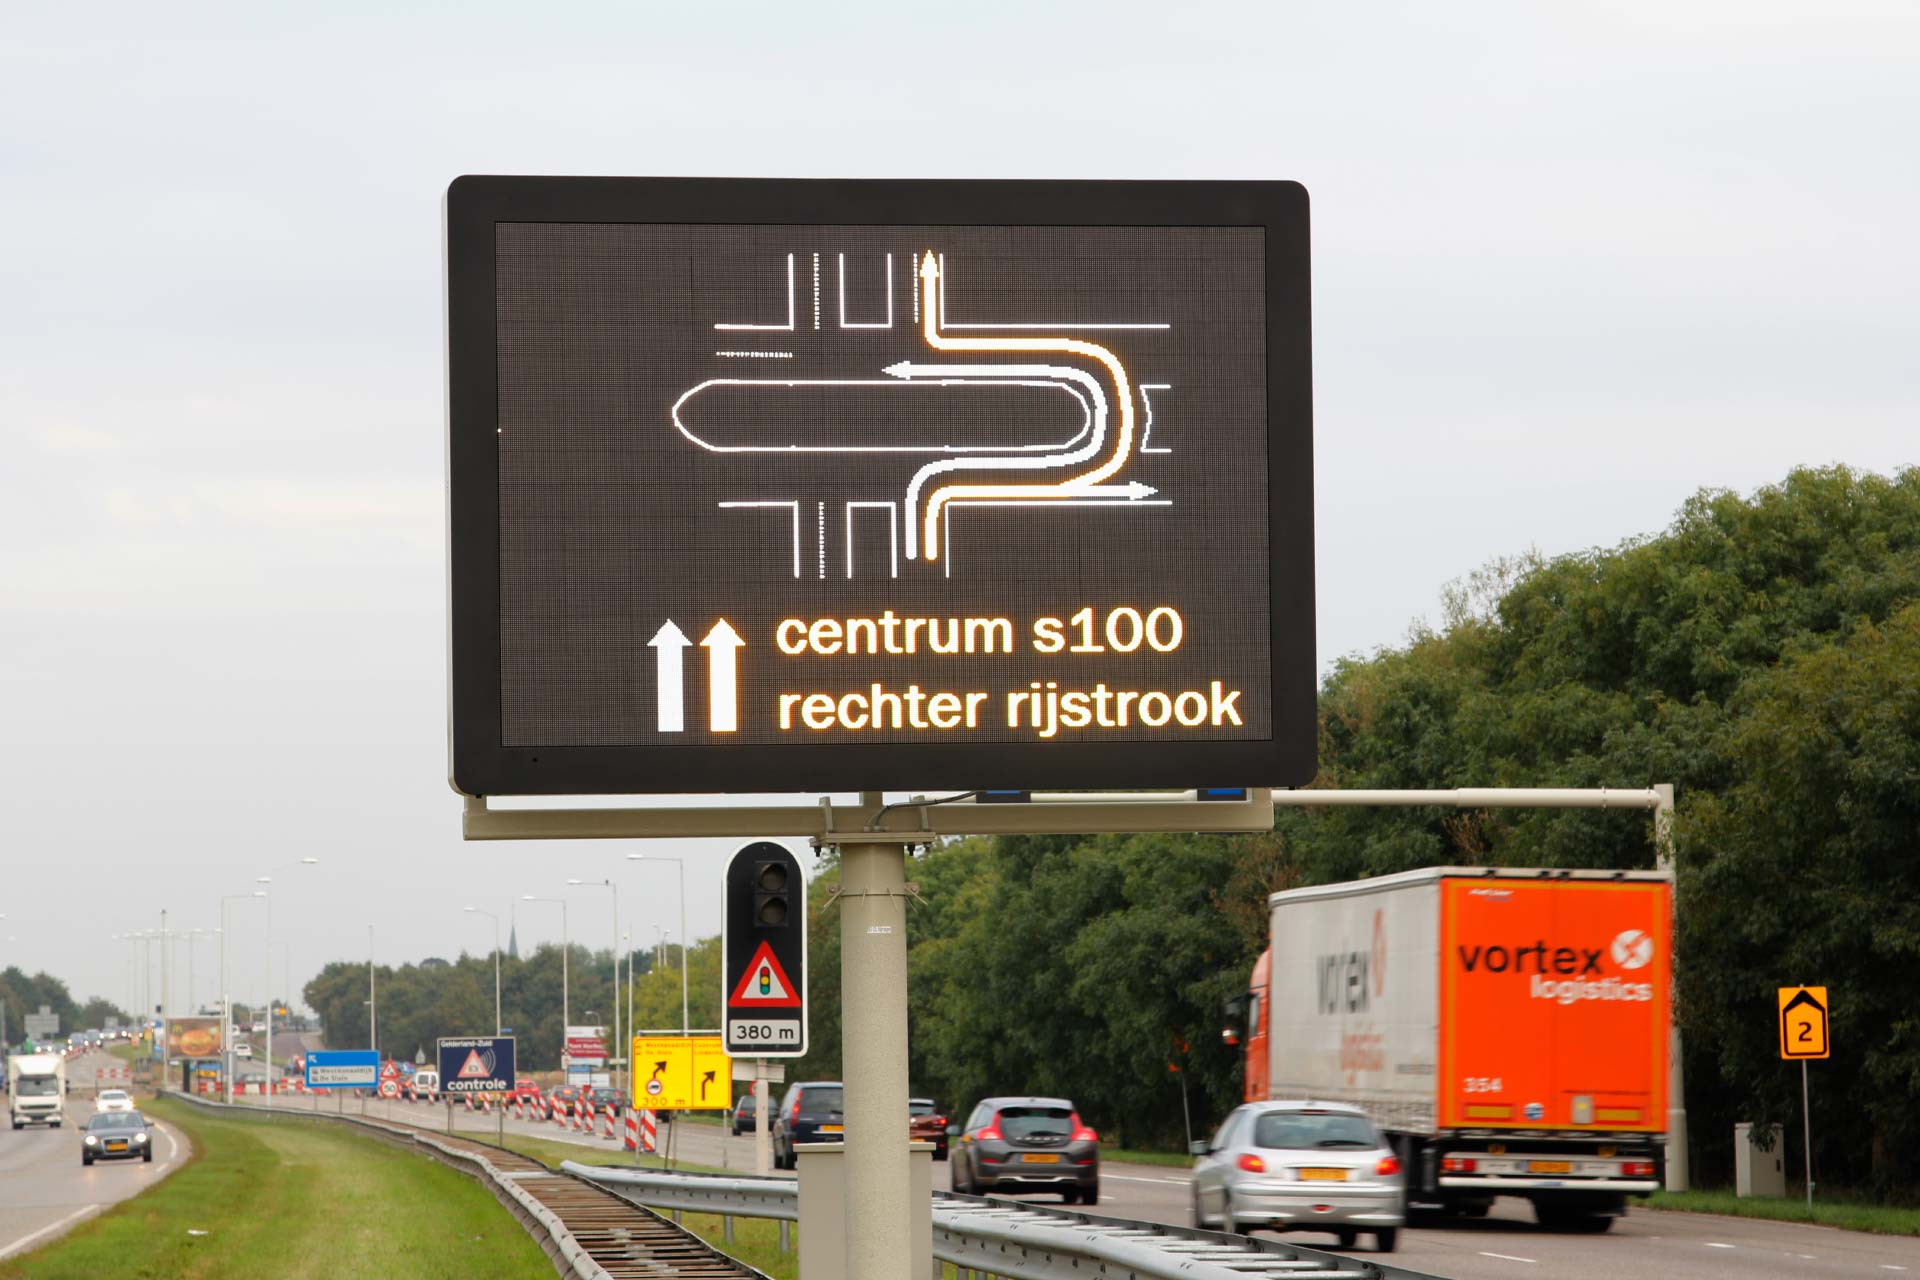 Mobility, LED scherm, lichtreclame, LED schermen, LED display, LED reclame